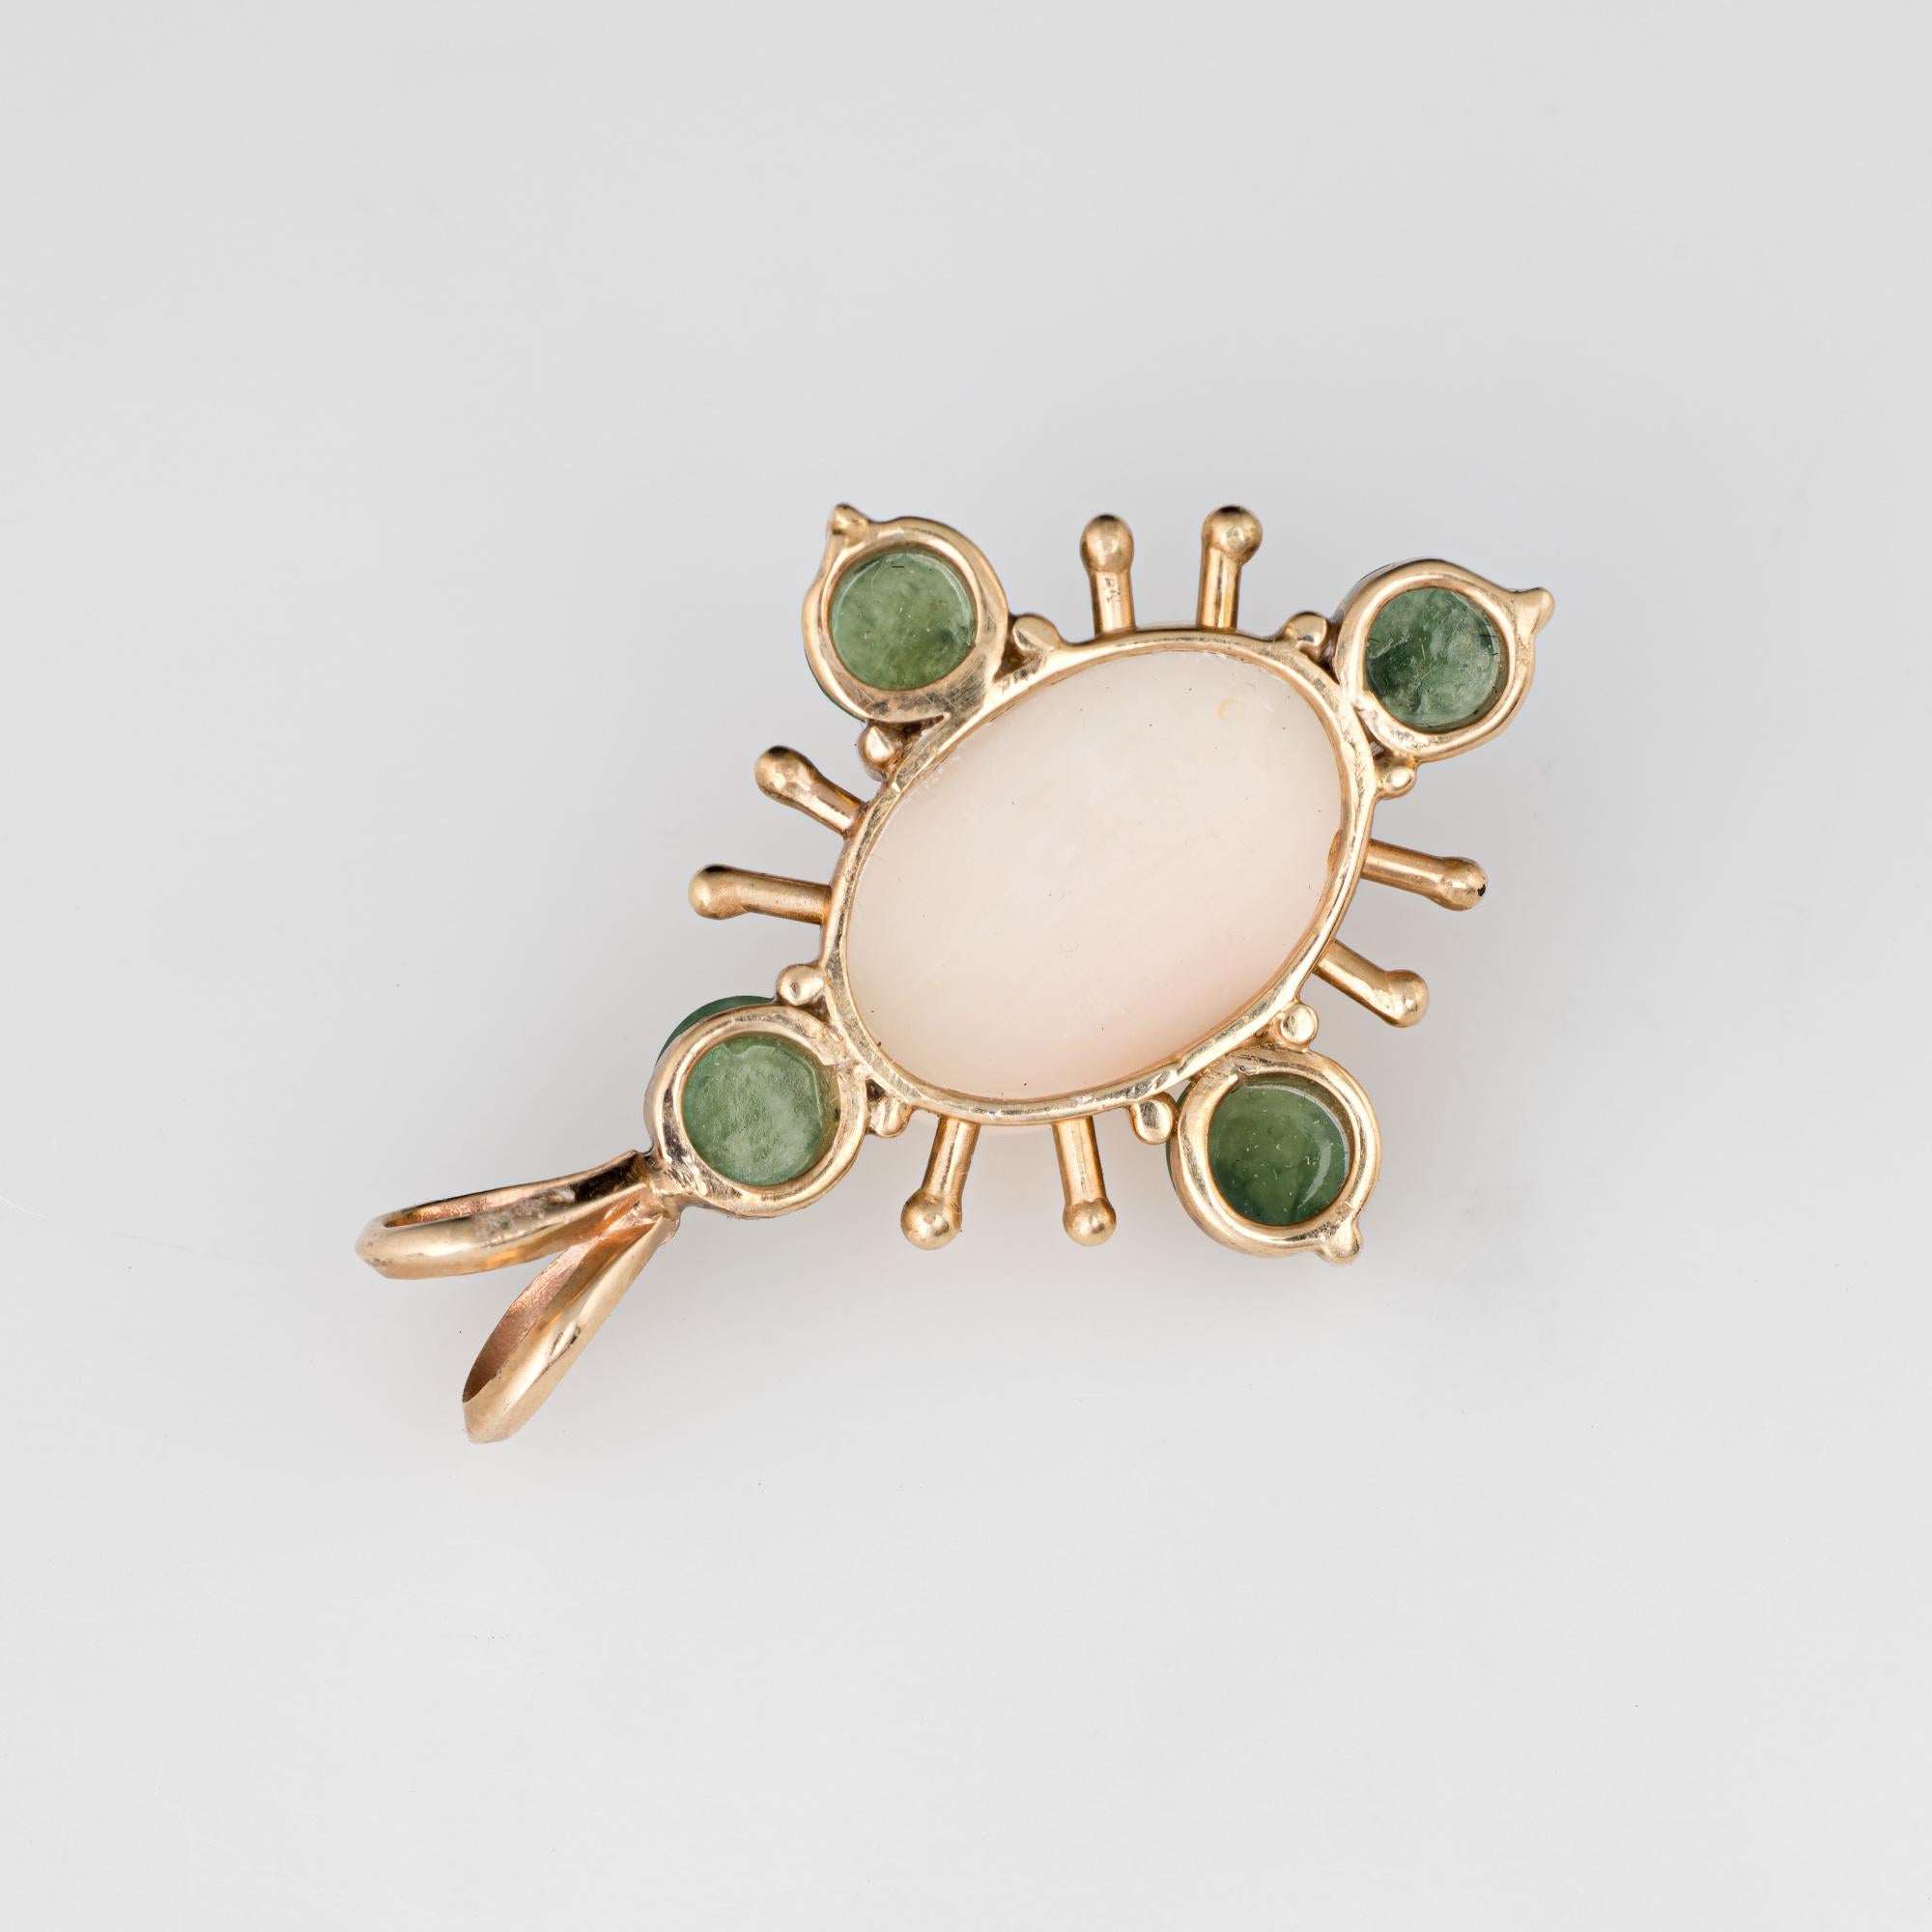 Finely detailed vintage angel skin coral & jade pendant (circa 1950s to 1960s) crafted in 14k yellow gold.  

Angel skin coral measures 13mm x 9mm (estimated at 5 carats), accented with four piece of jade measuring 4mm each. The coral and jade is in